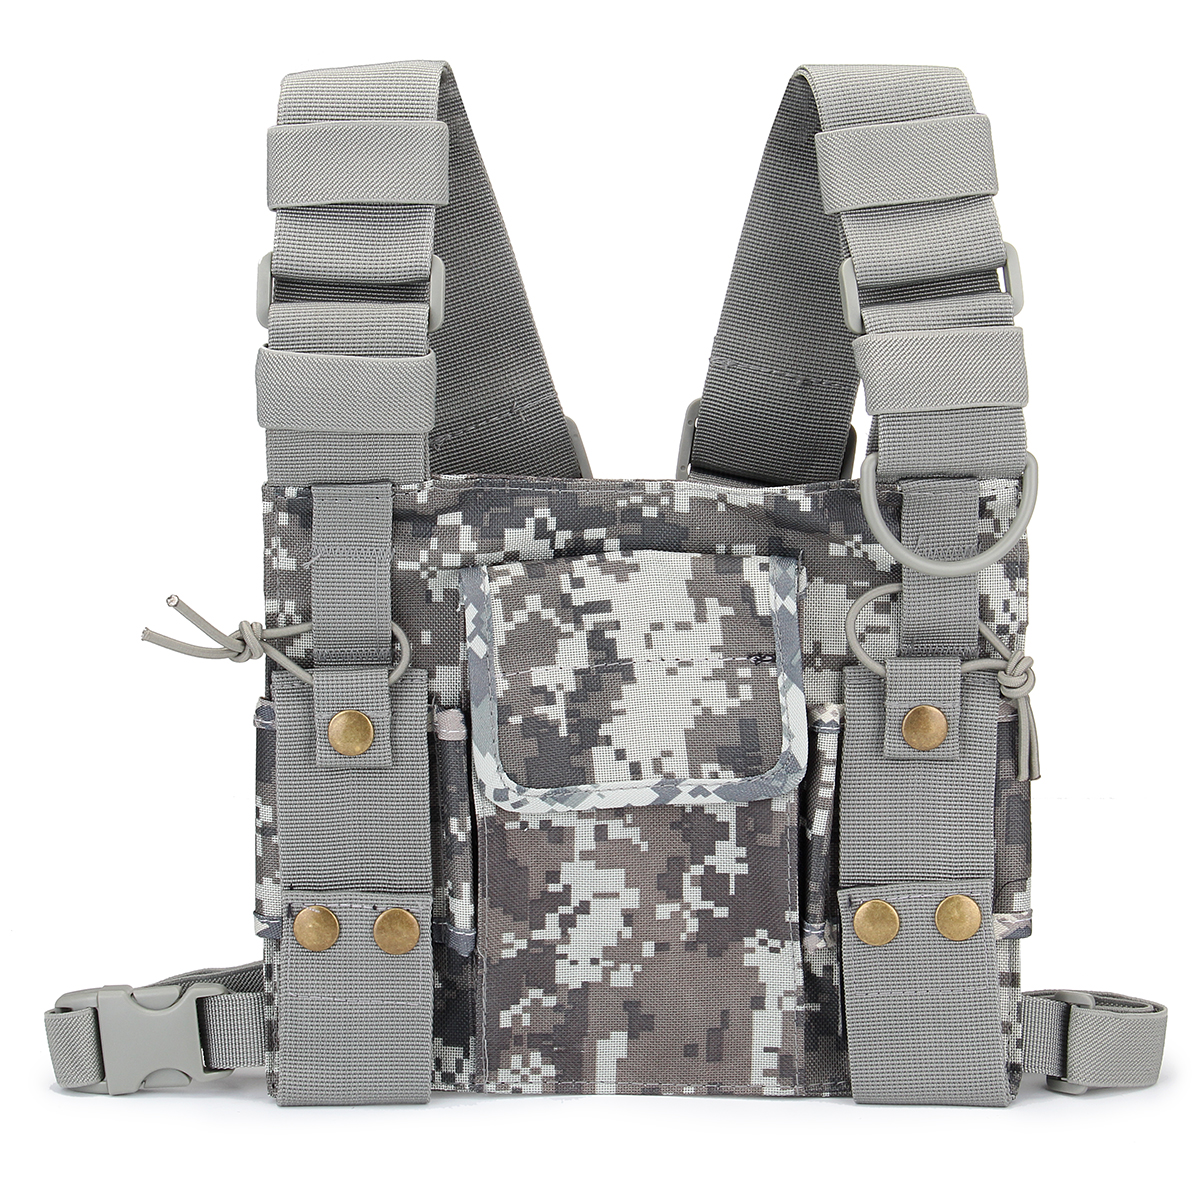 Find Radio Walkie Talkie Chest Pocket Harness Bag Backpack Holster Pouch Camouflage for Sale on Gipsybee.com with cryptocurrencies